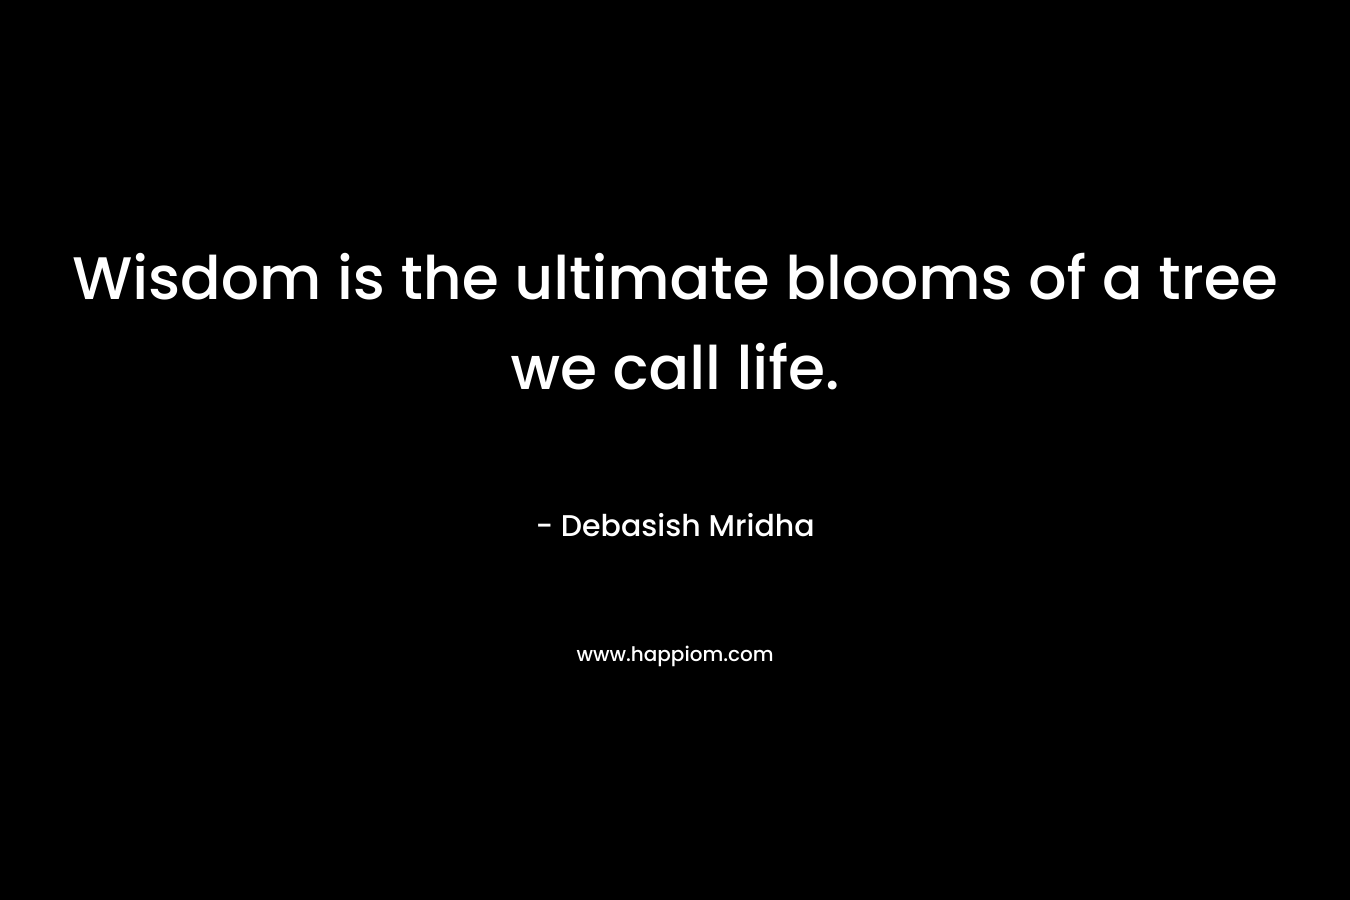 Wisdom is the ultimate blooms of a tree we call life. – Debasish Mridha